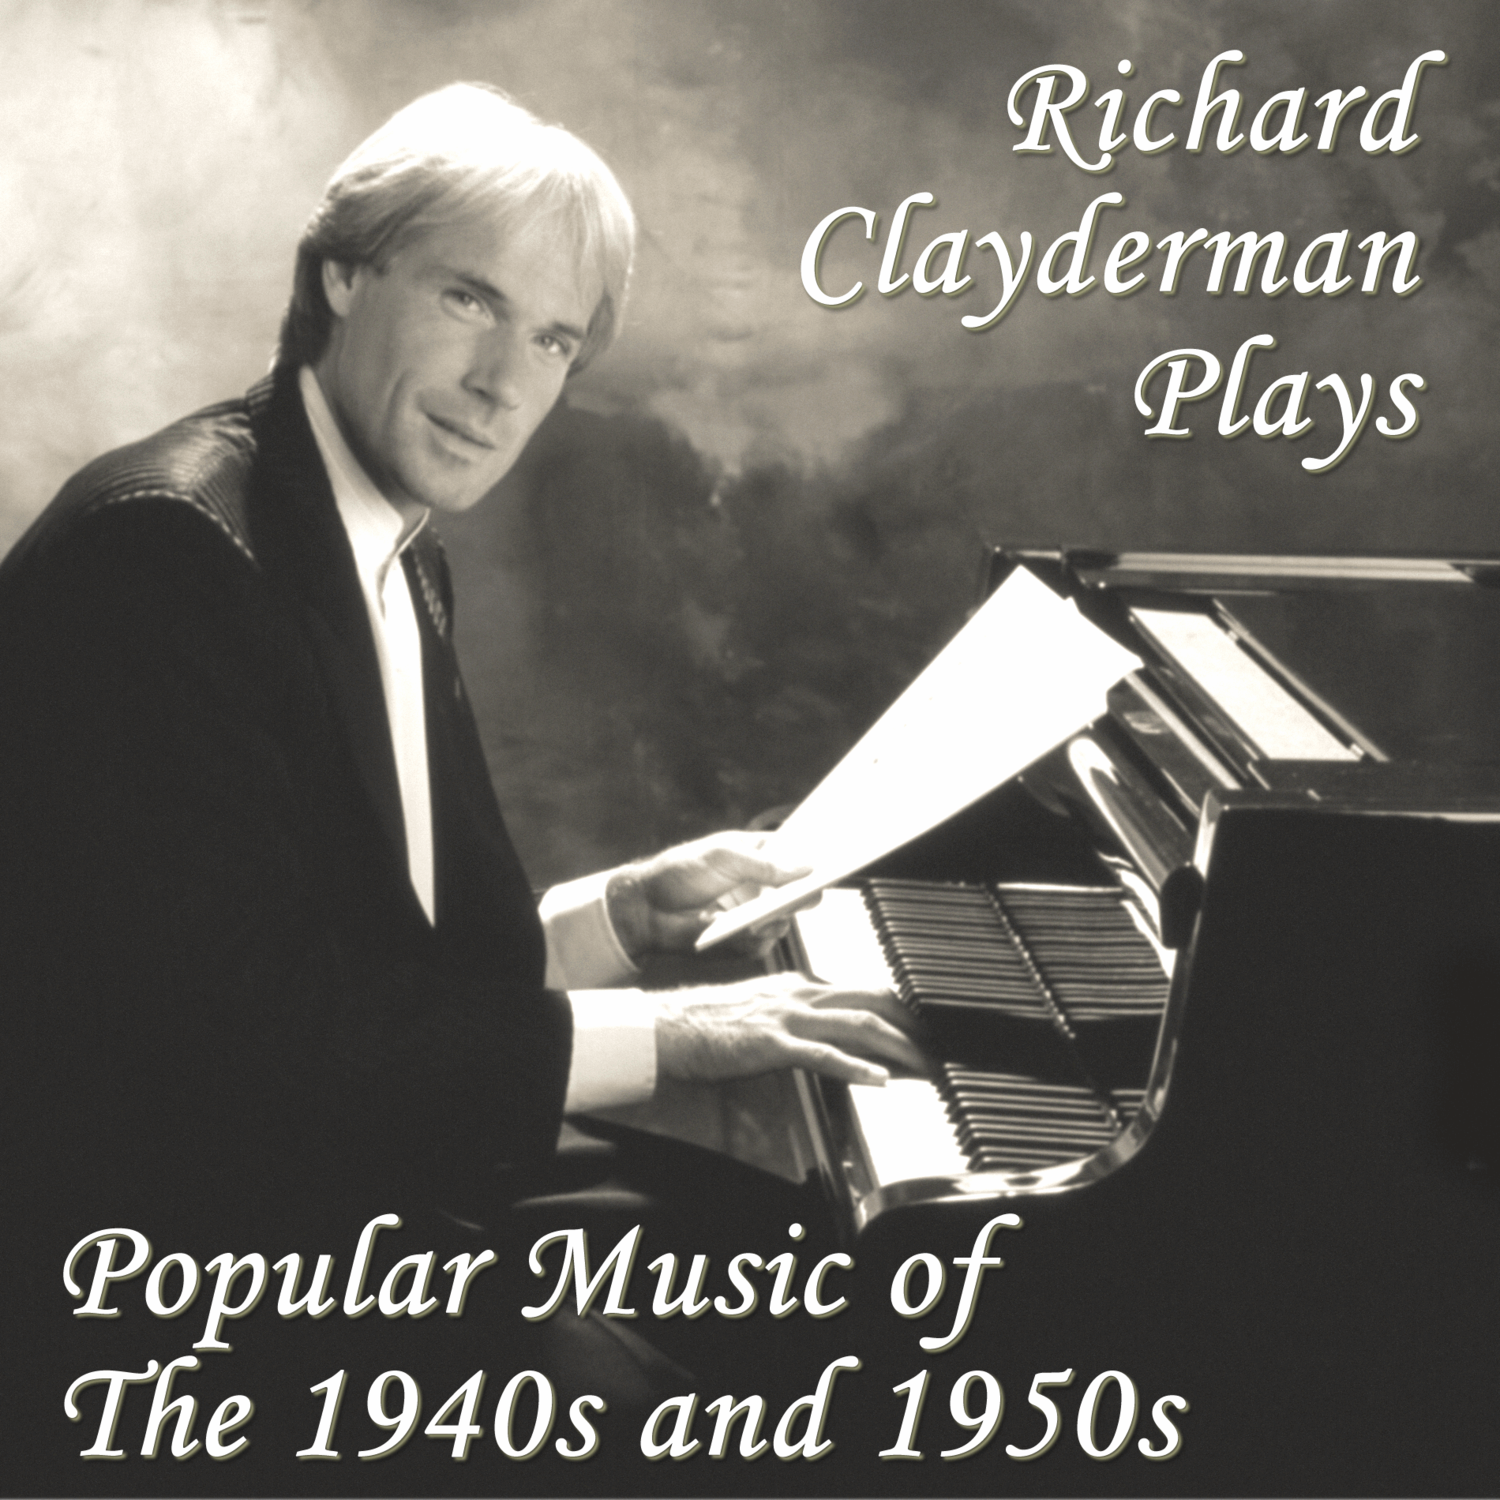 Richard Clayderman Plays Popular Music of the 1940s and 1950s